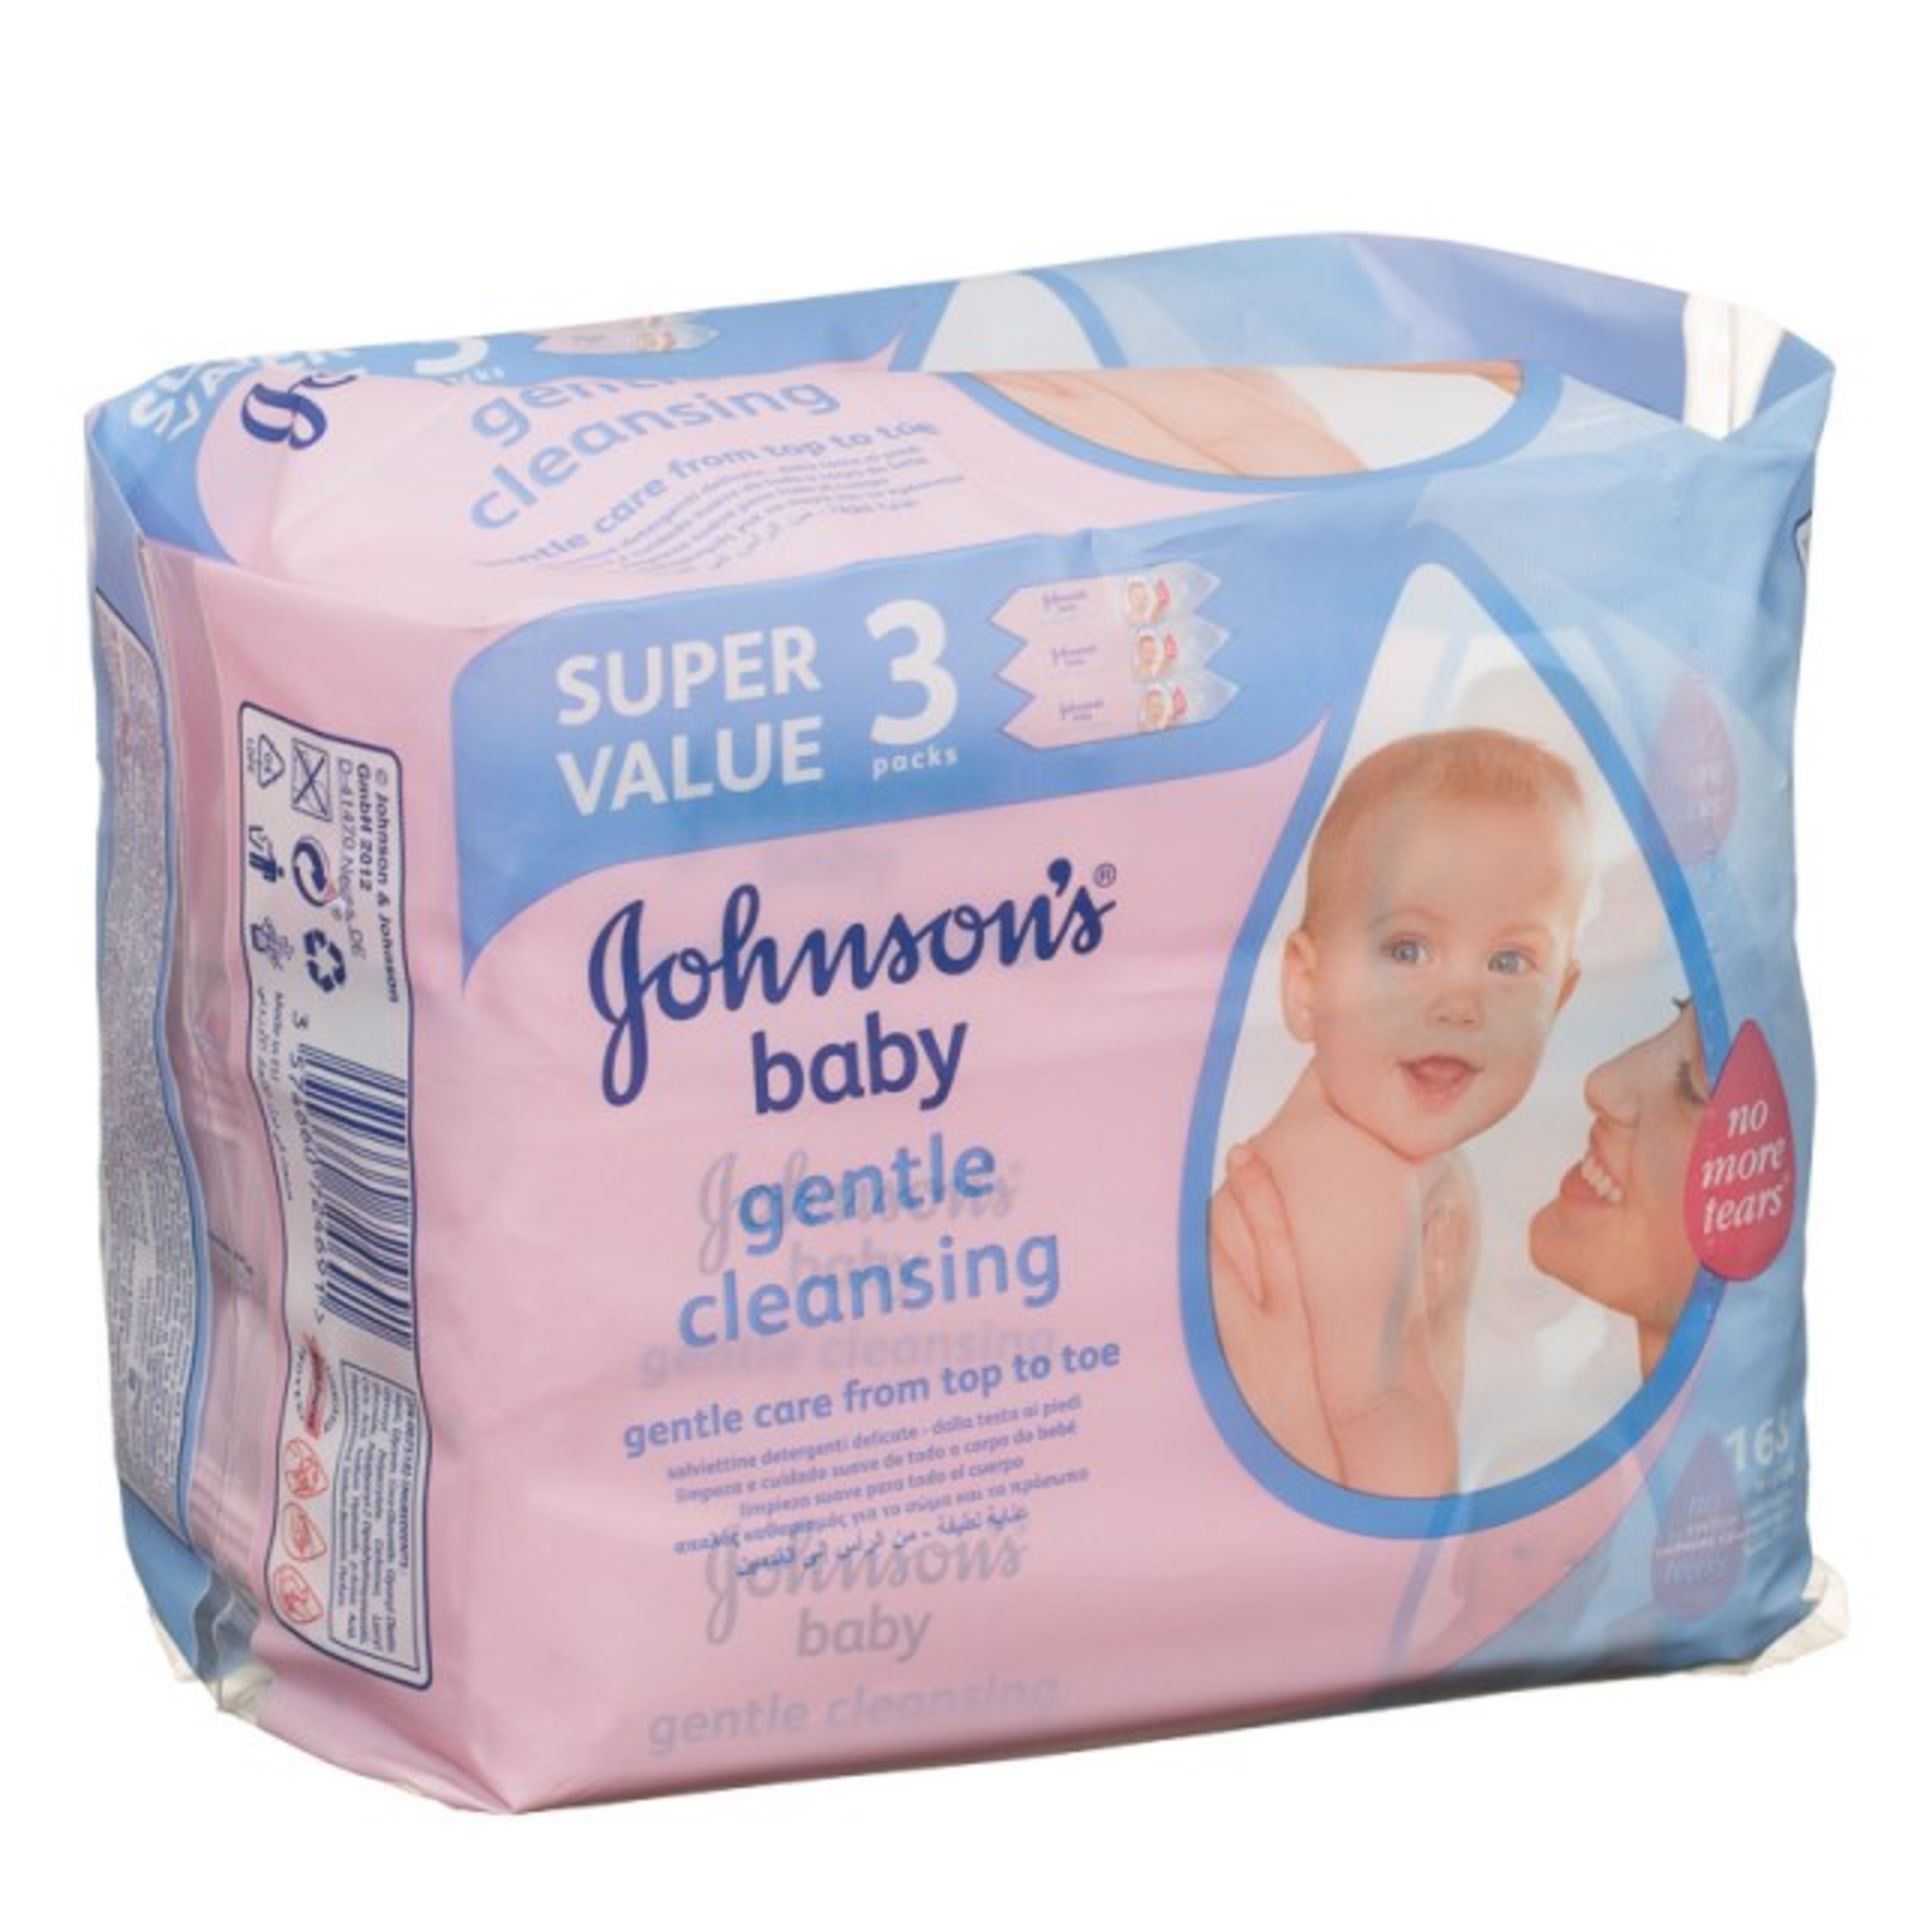 V *TRADE QTY* Brand New 3 Pack Johnsons Baby Gentle Cleansing RRP9.85 X 30 Bid price to be